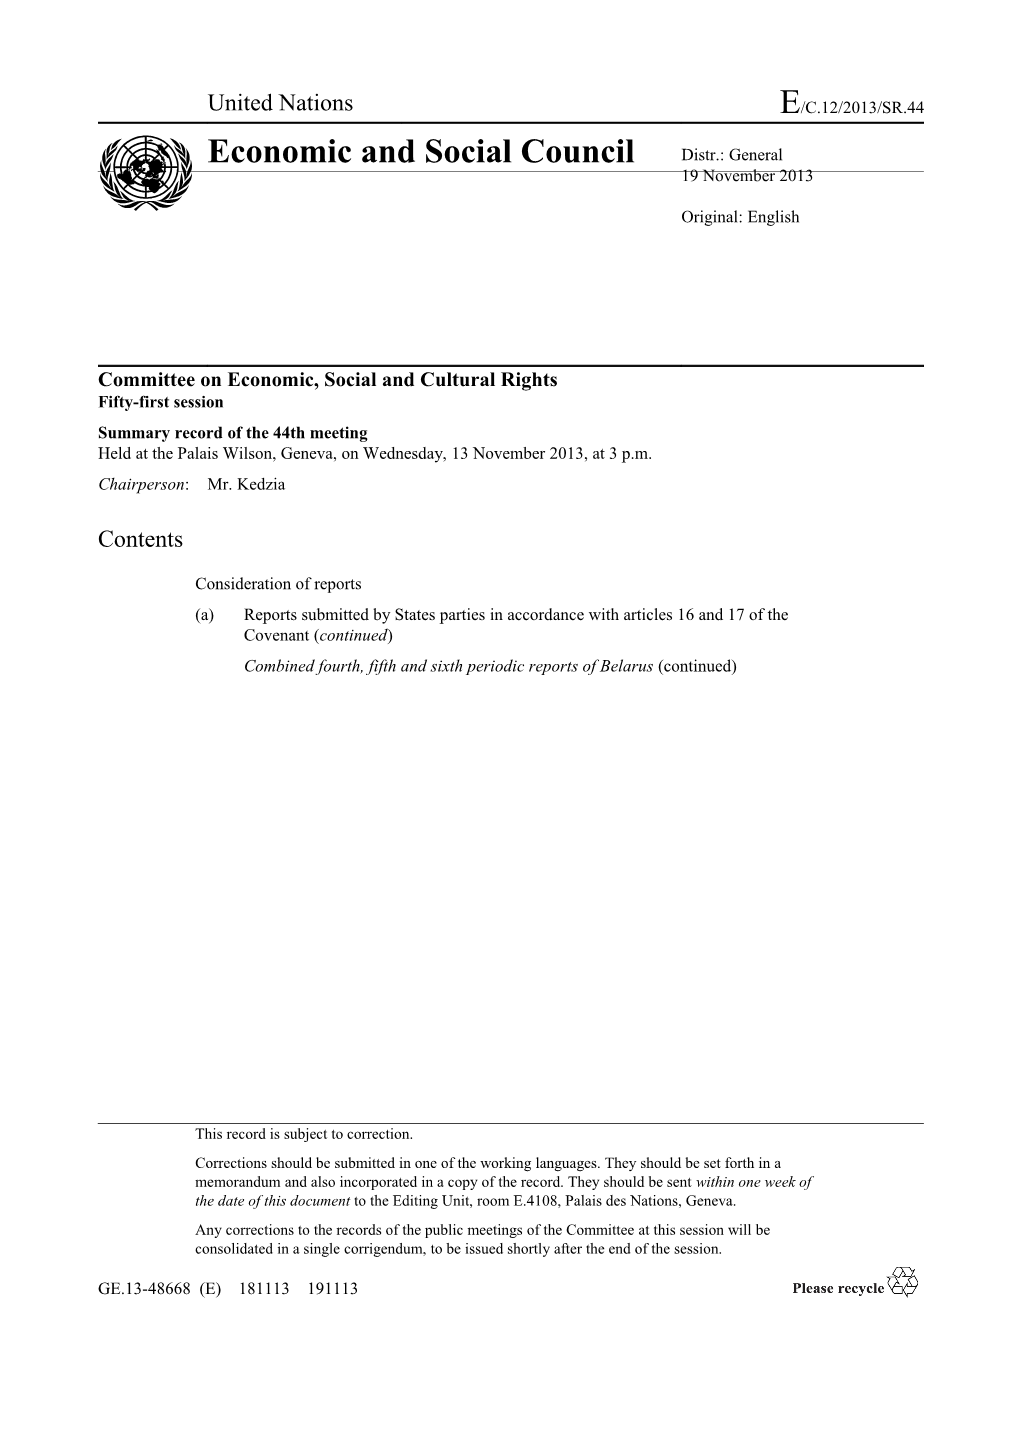 Committee on Economic, Social and Cultural Rights s4